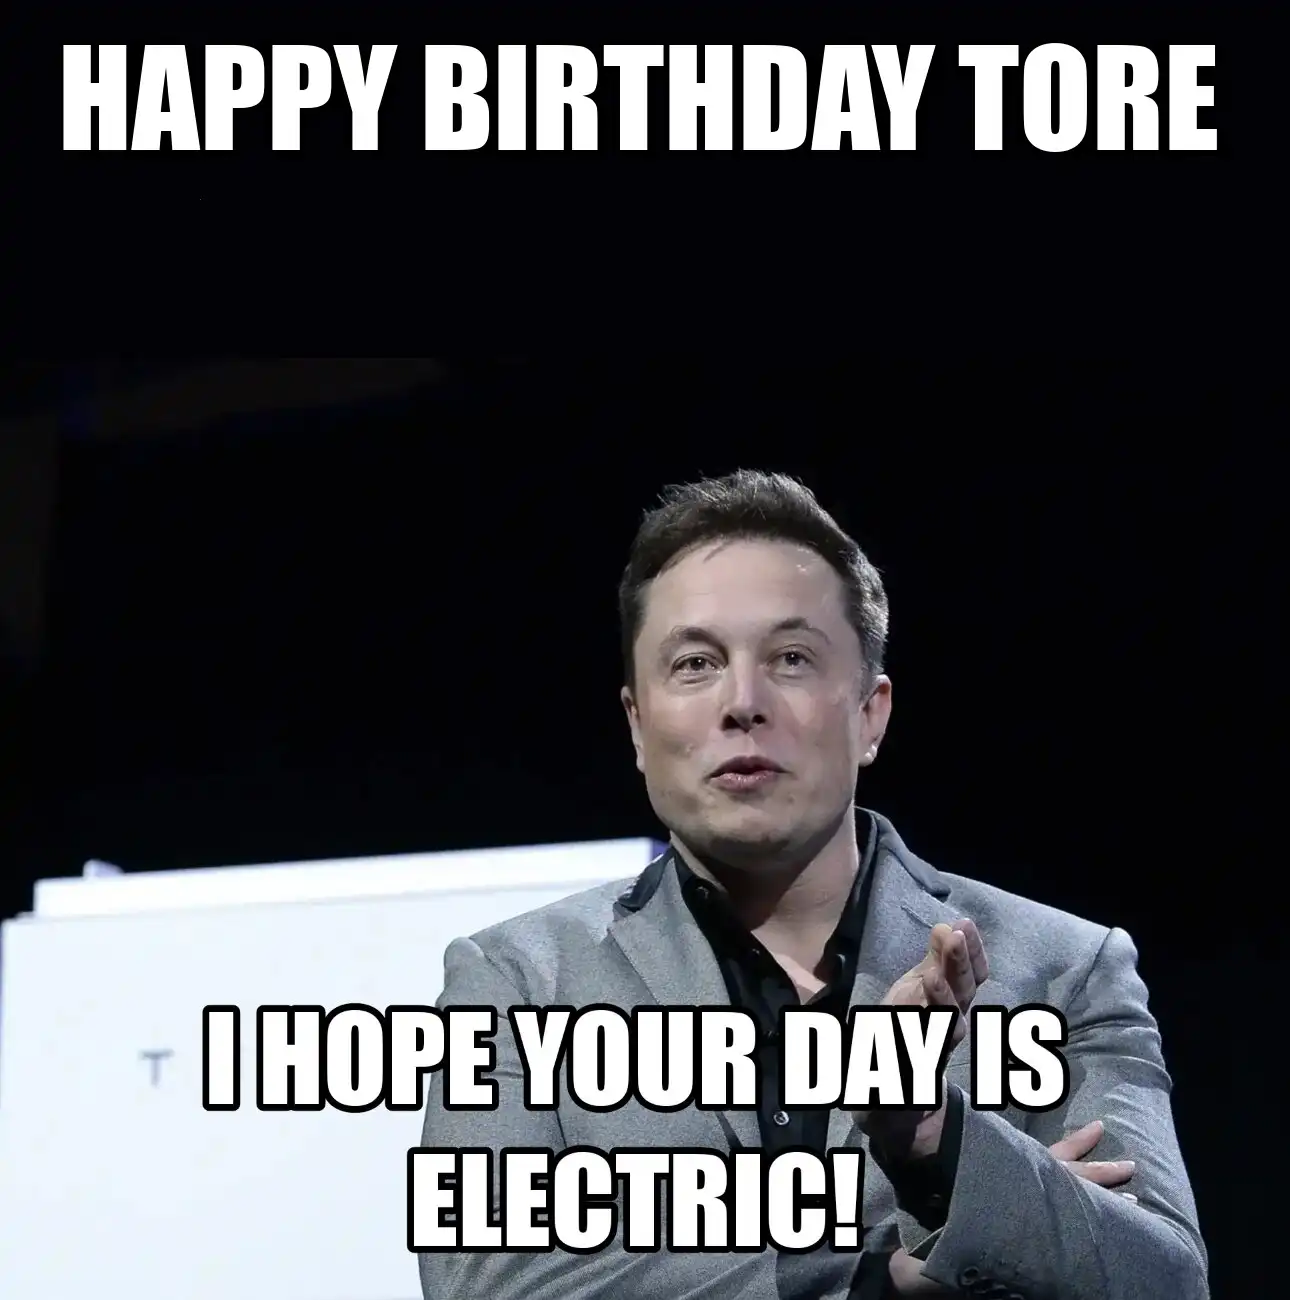 Happy Birthday Tore I Hope Your Day Is Electric Meme